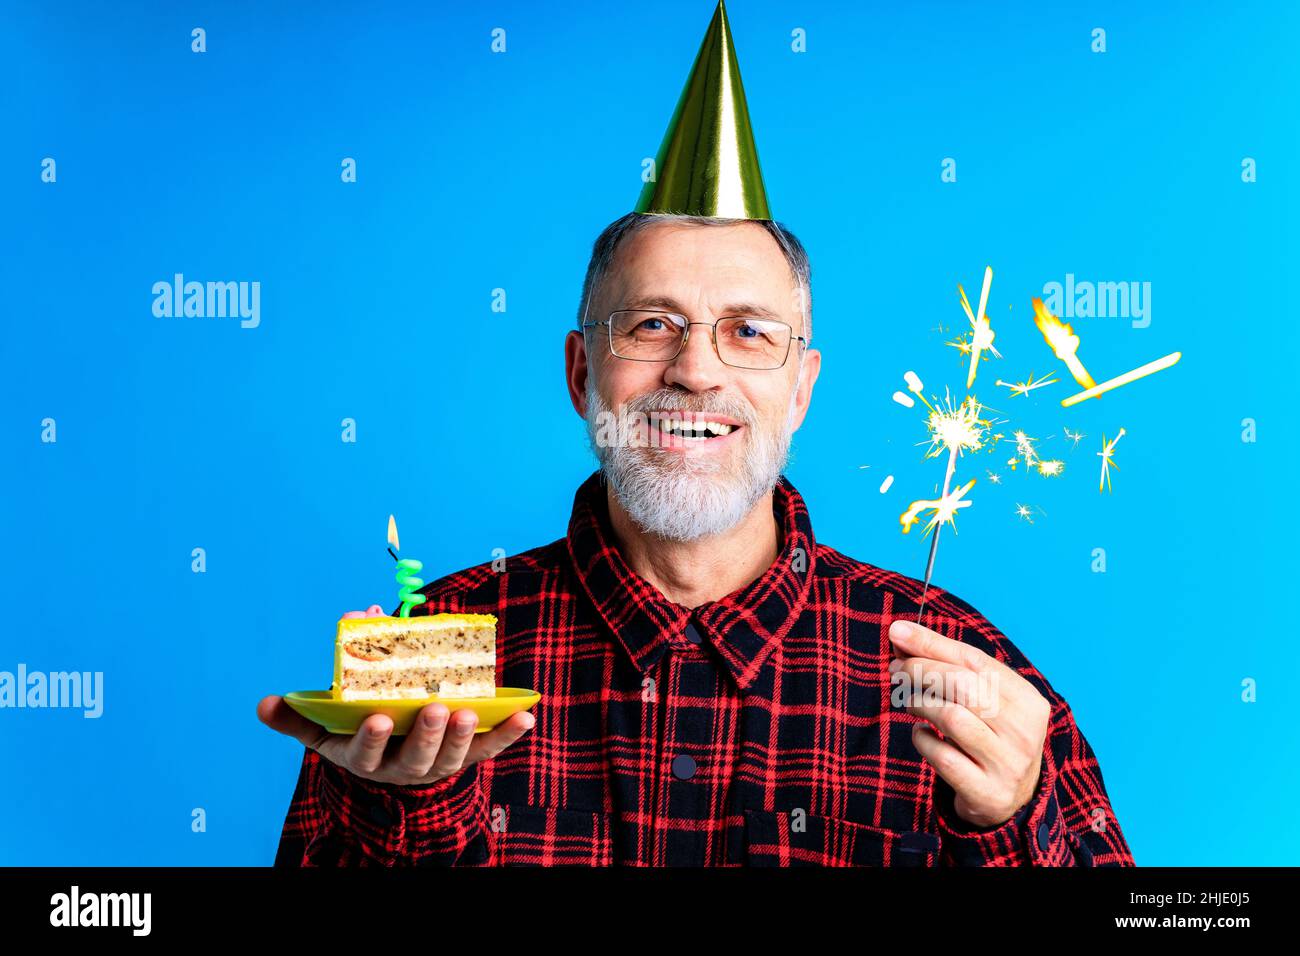 man wearing birthday hat with cake isolated on bright blue colour background, studio portrait Stock Photo